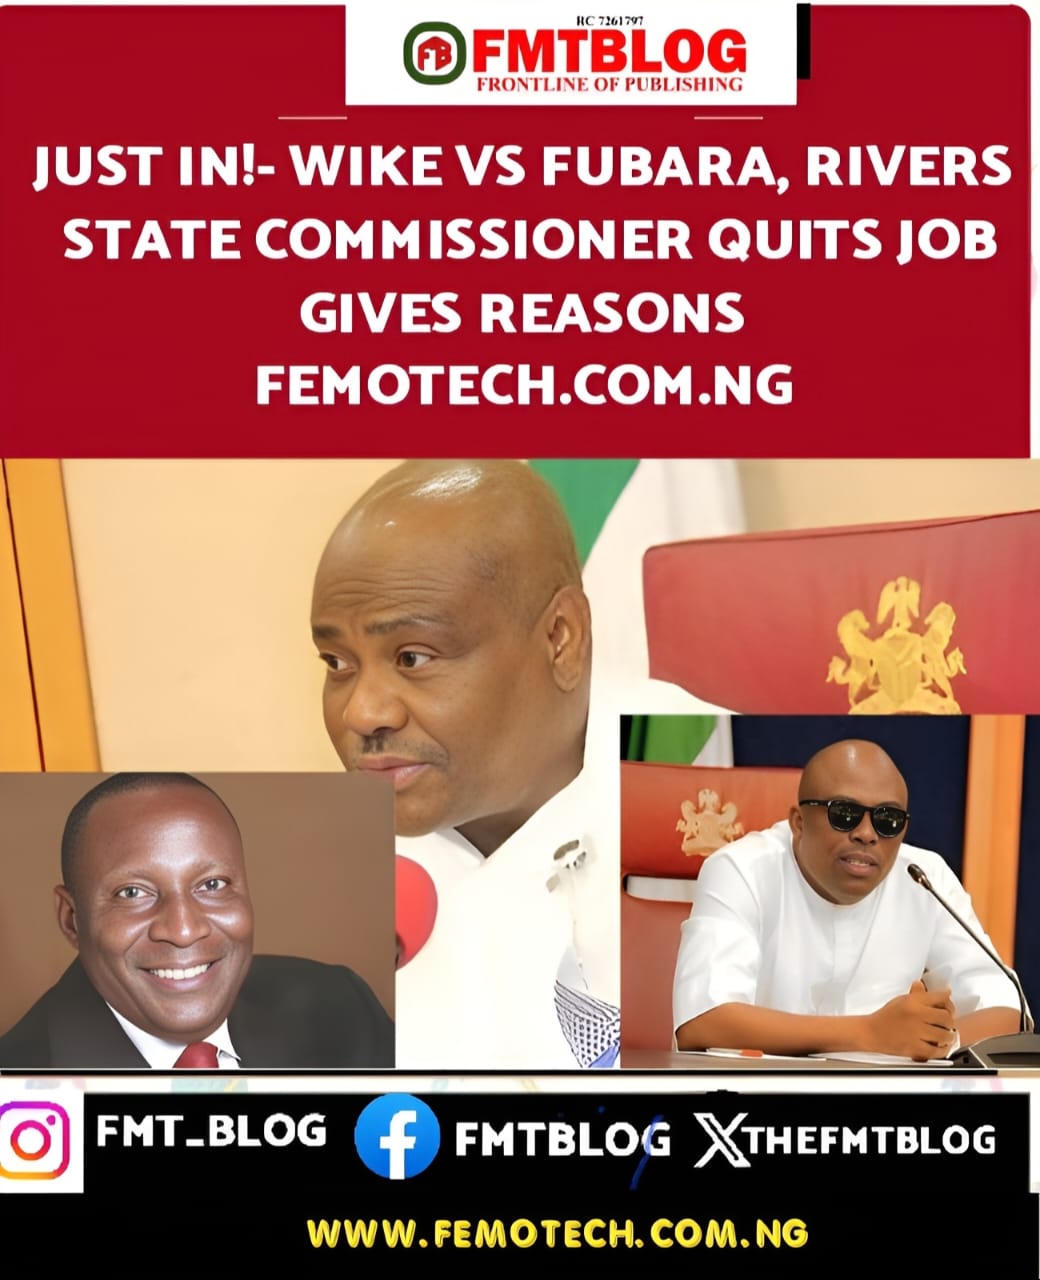 JUST IN!- Wike vs Fubara: Rivers State Commissioner Quits Job, Gives Reasons